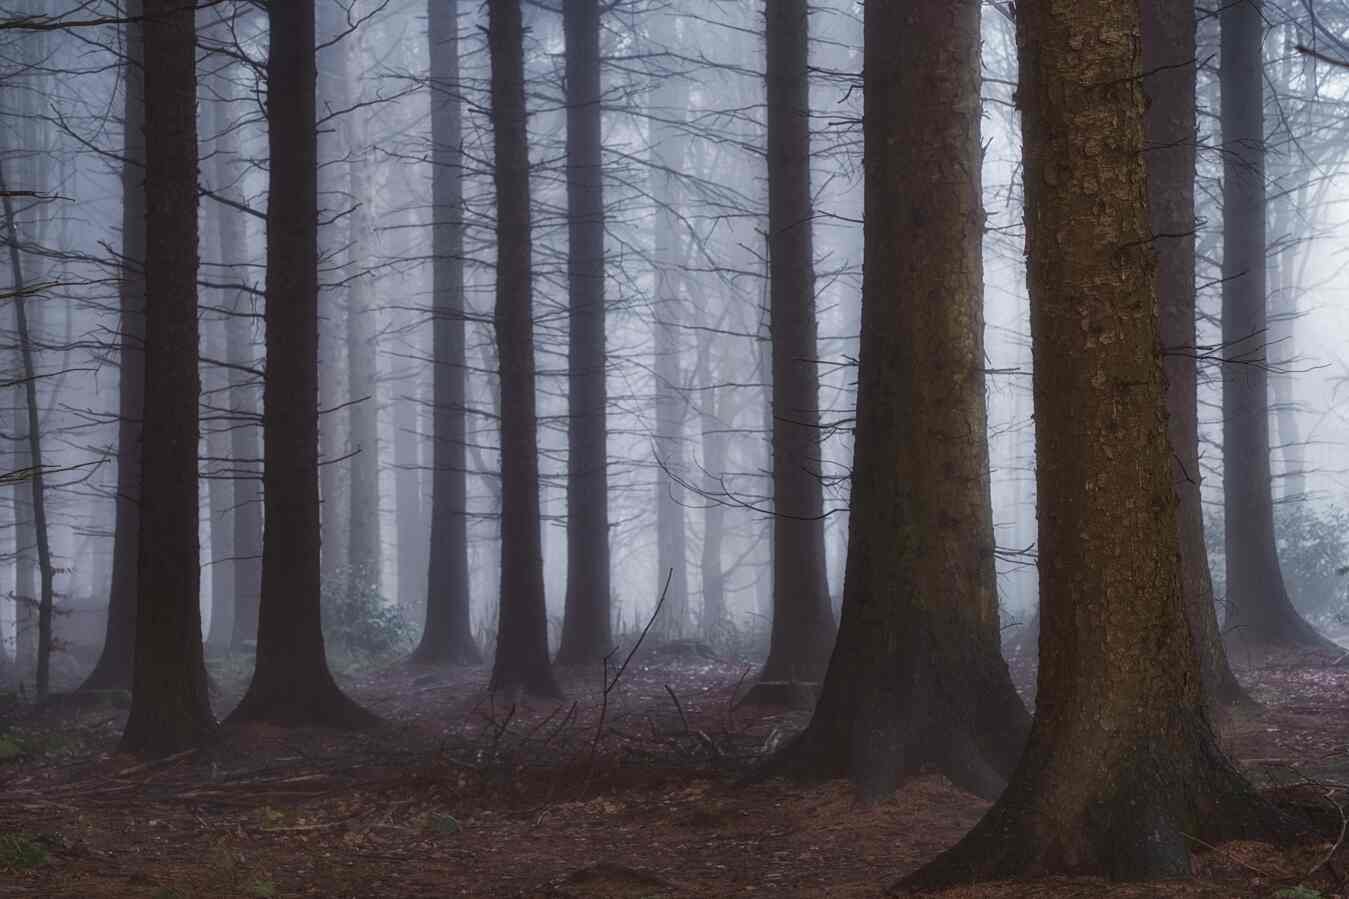 How to Improve your Woodland Photography | Woodland Pictures